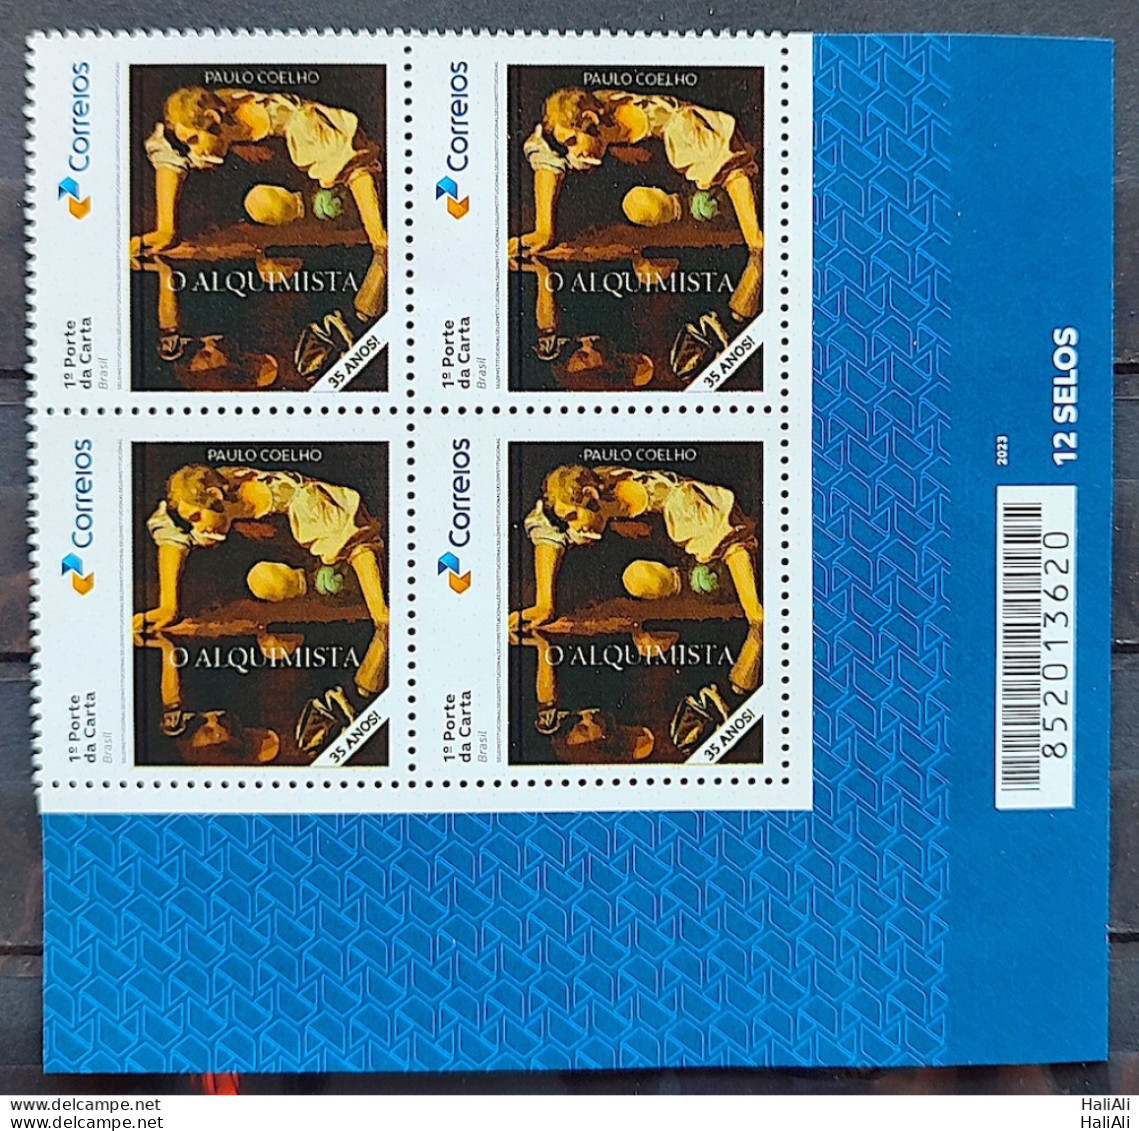 SI 05 Brazil Institutional Stamp Alchemist Paulo Coelho Literature 2023 Block Of 4 Bar Code - Personalized Stamps